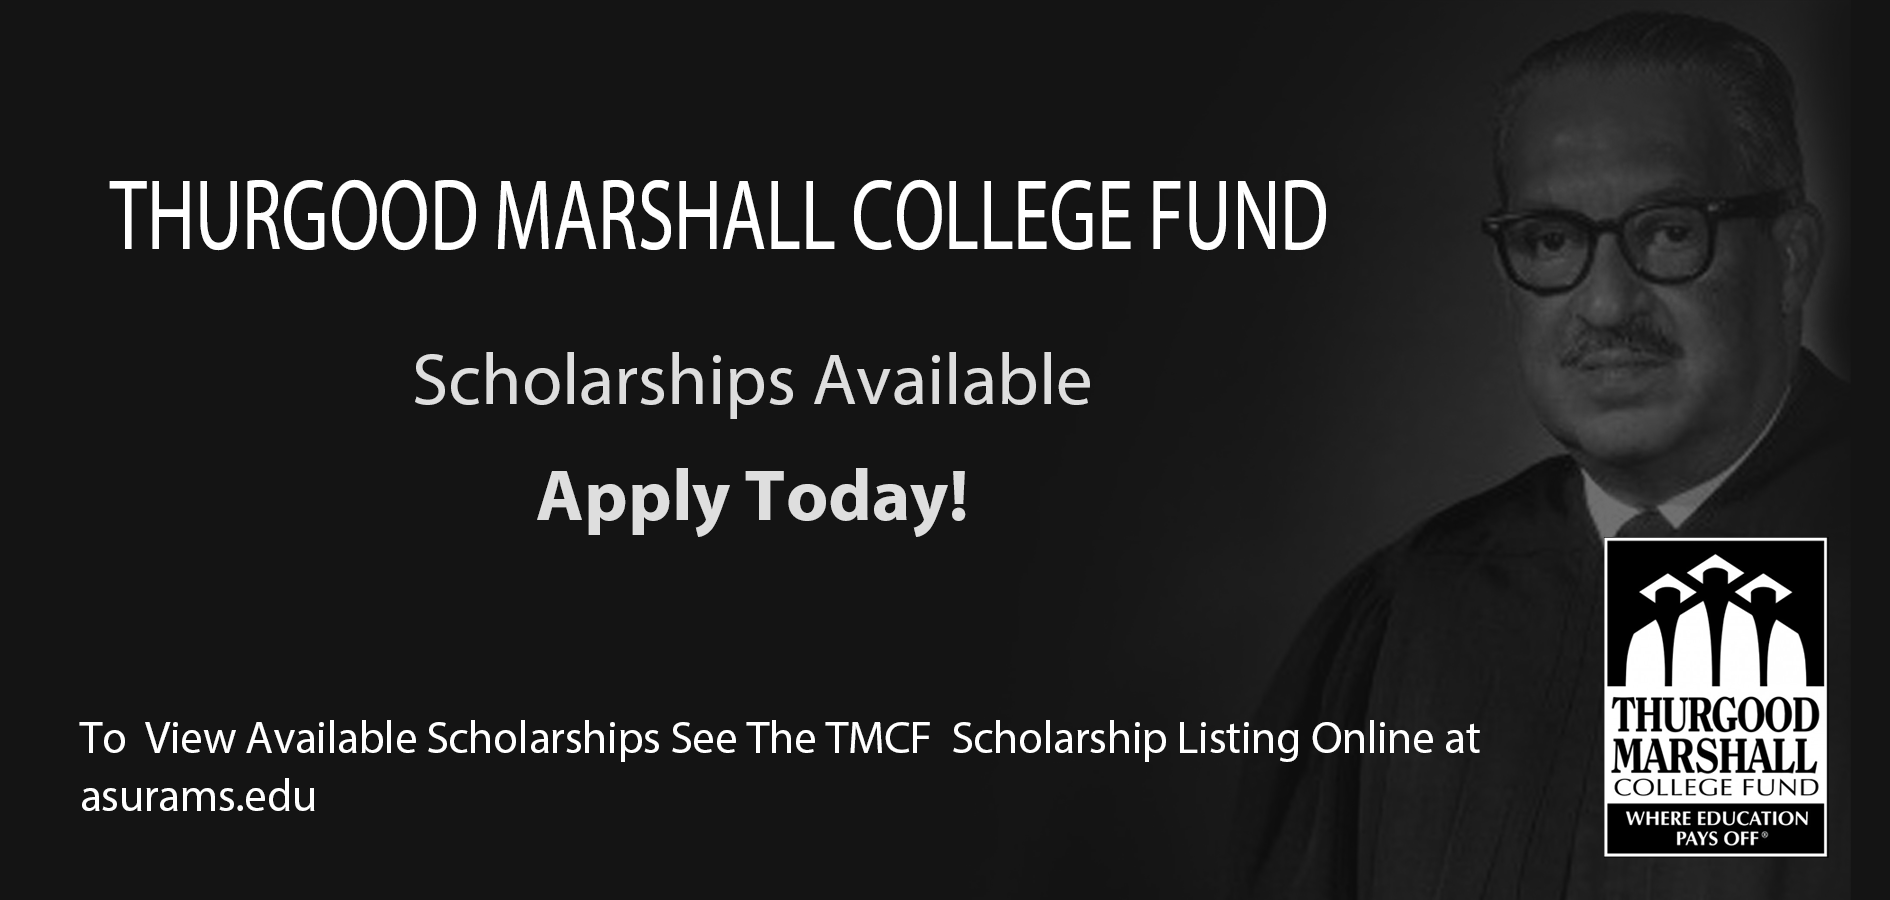 TMCF Scholarships Available